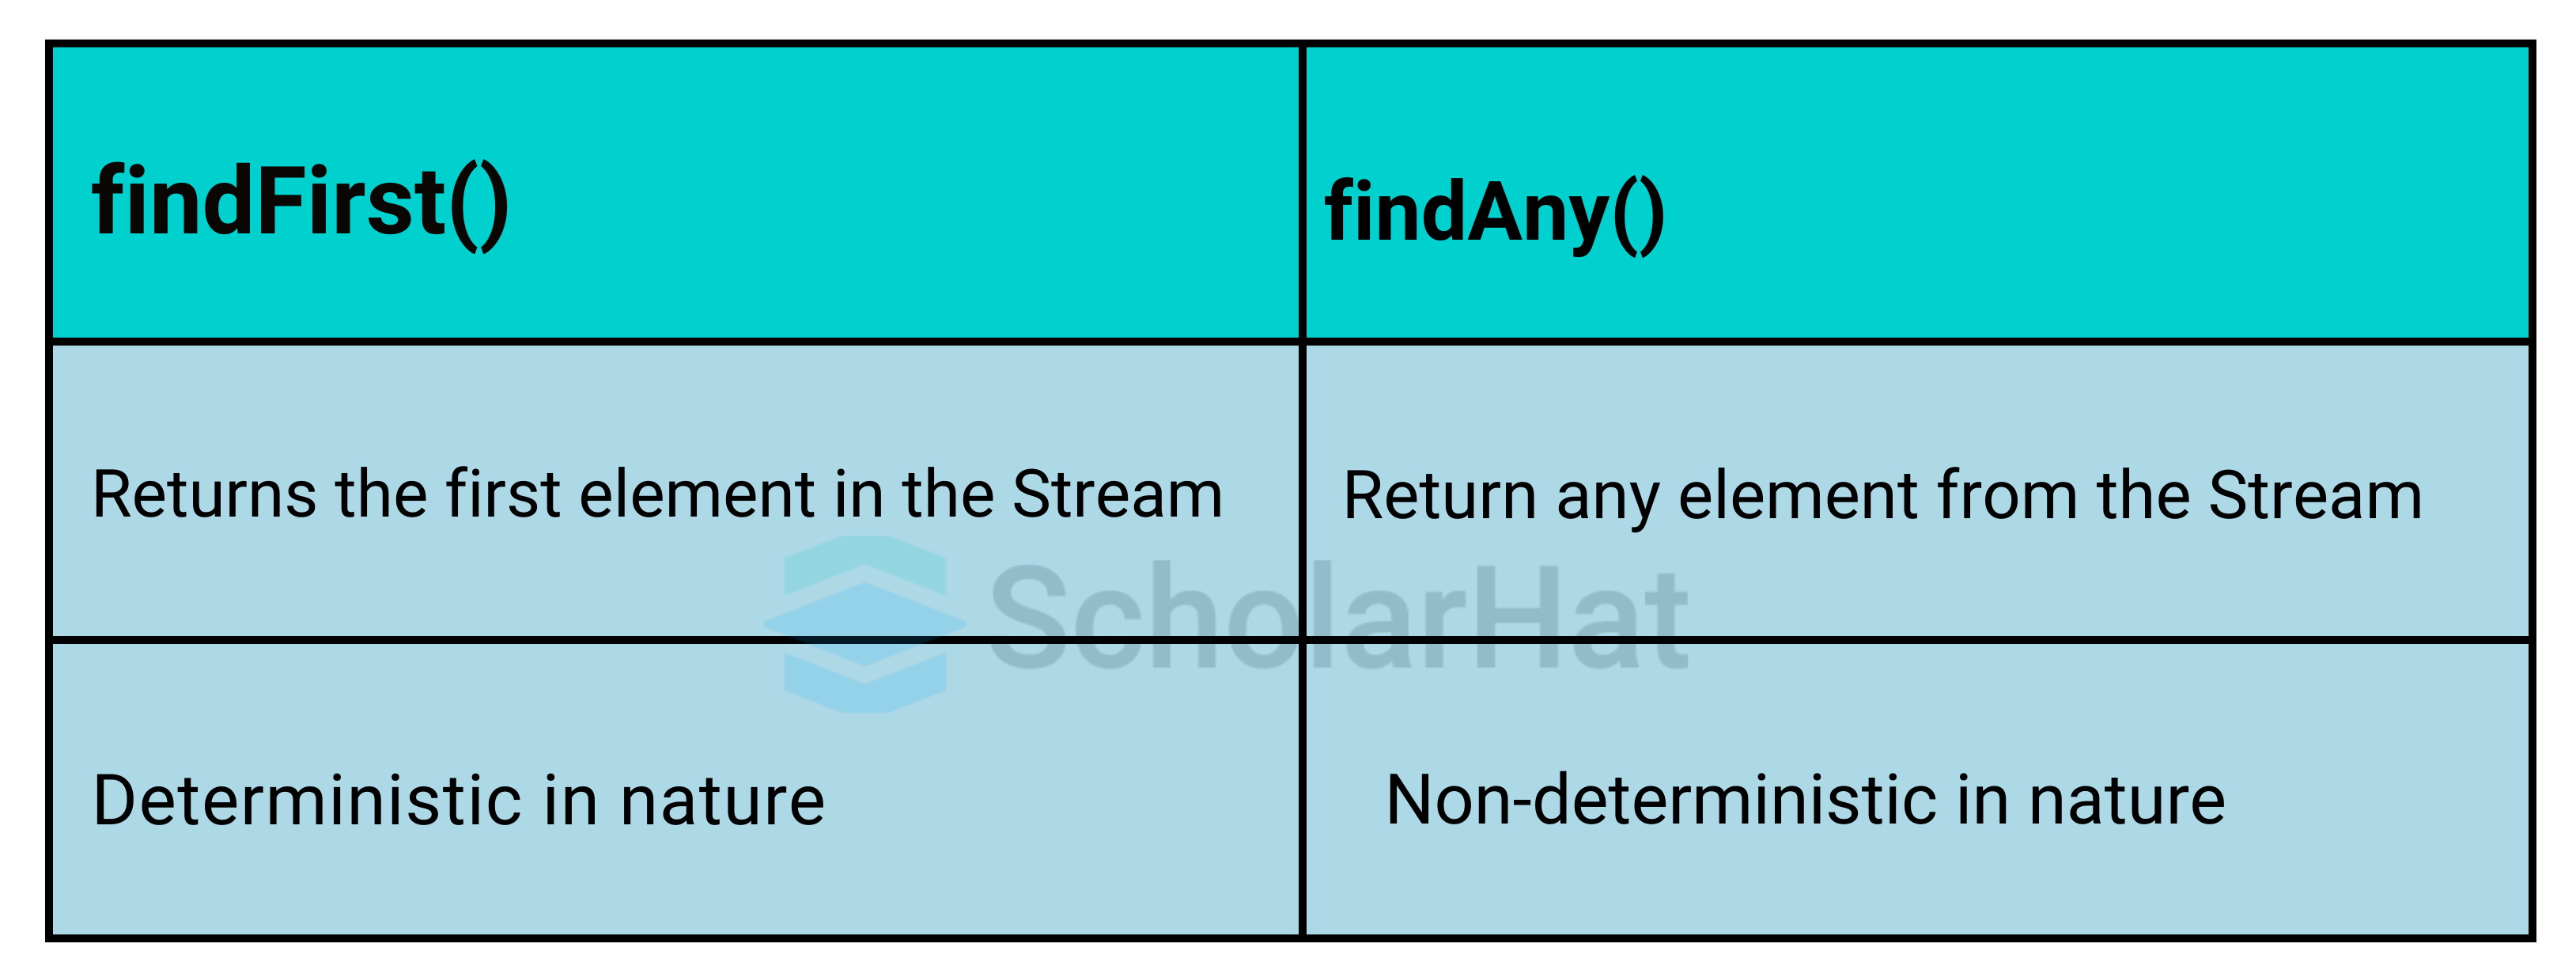 What is the difference between findFirst() and findAny()?